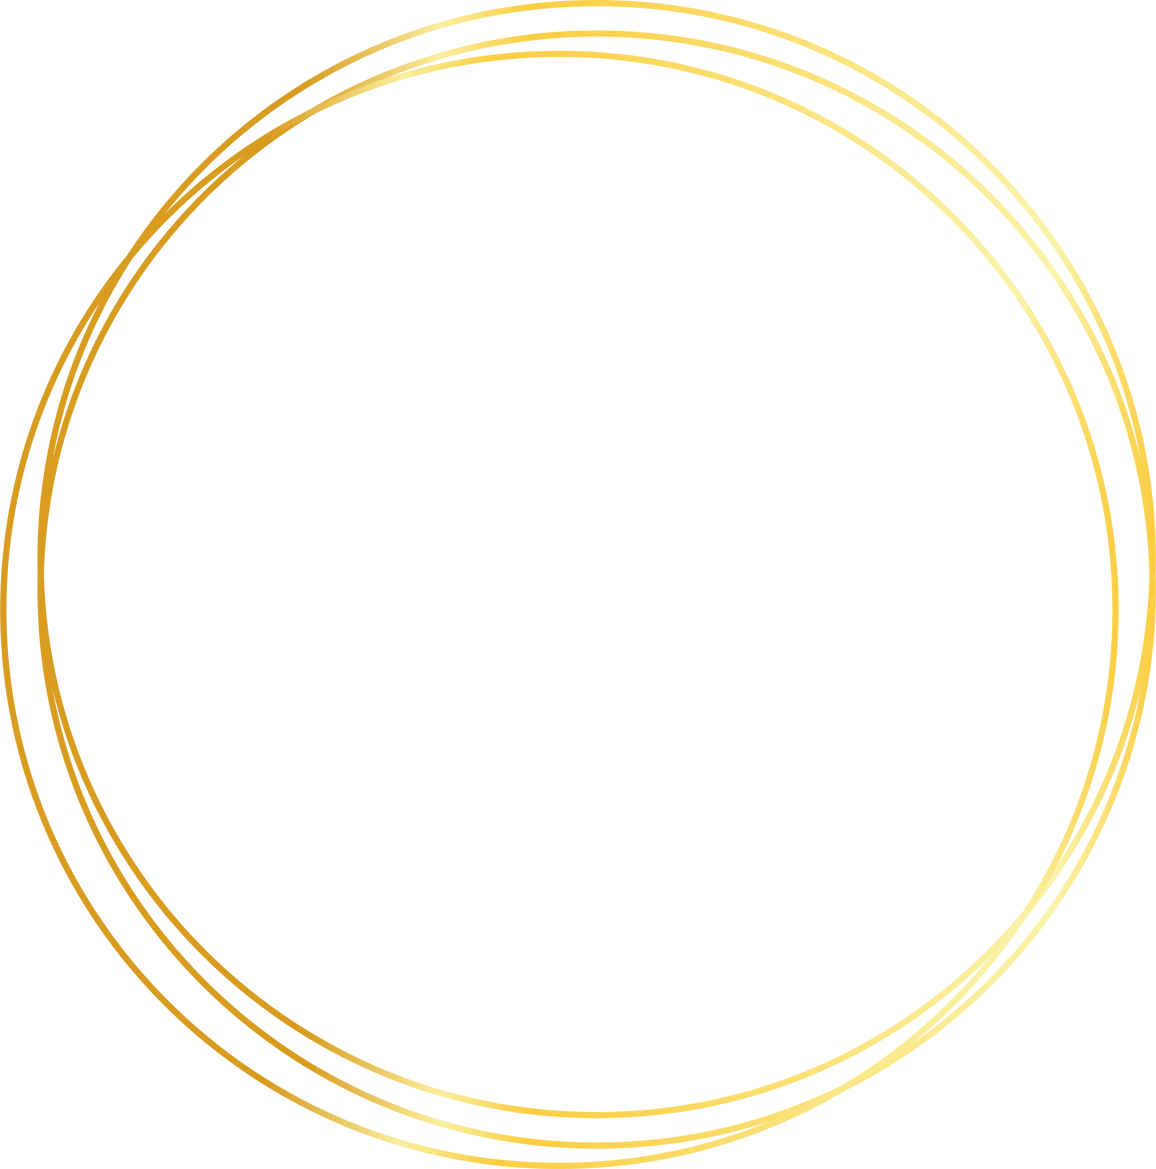 Circle  gold shape abstract frame border background element